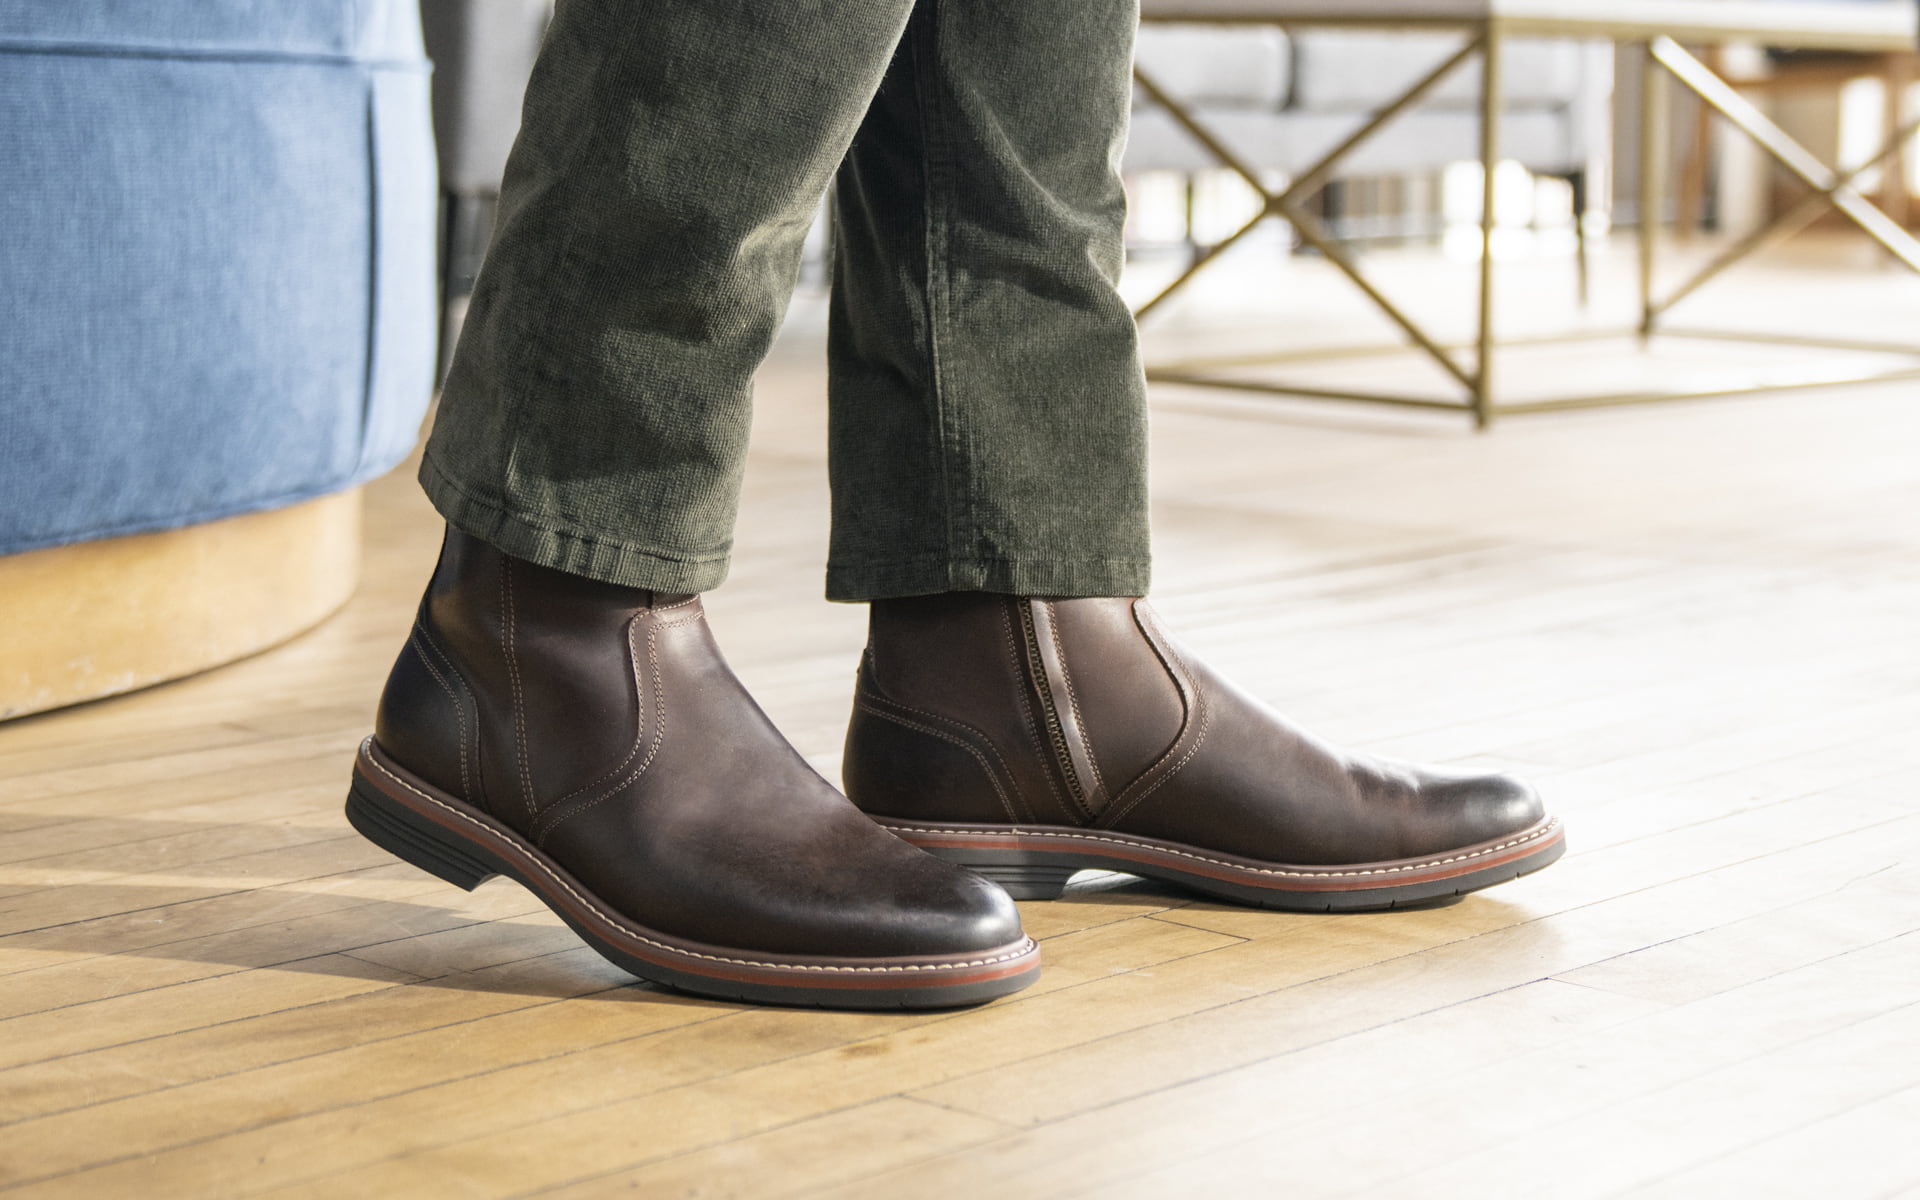 Click to shop the Florsheim Norwalk collection. Image features the Norwalk side zip boot in brown.